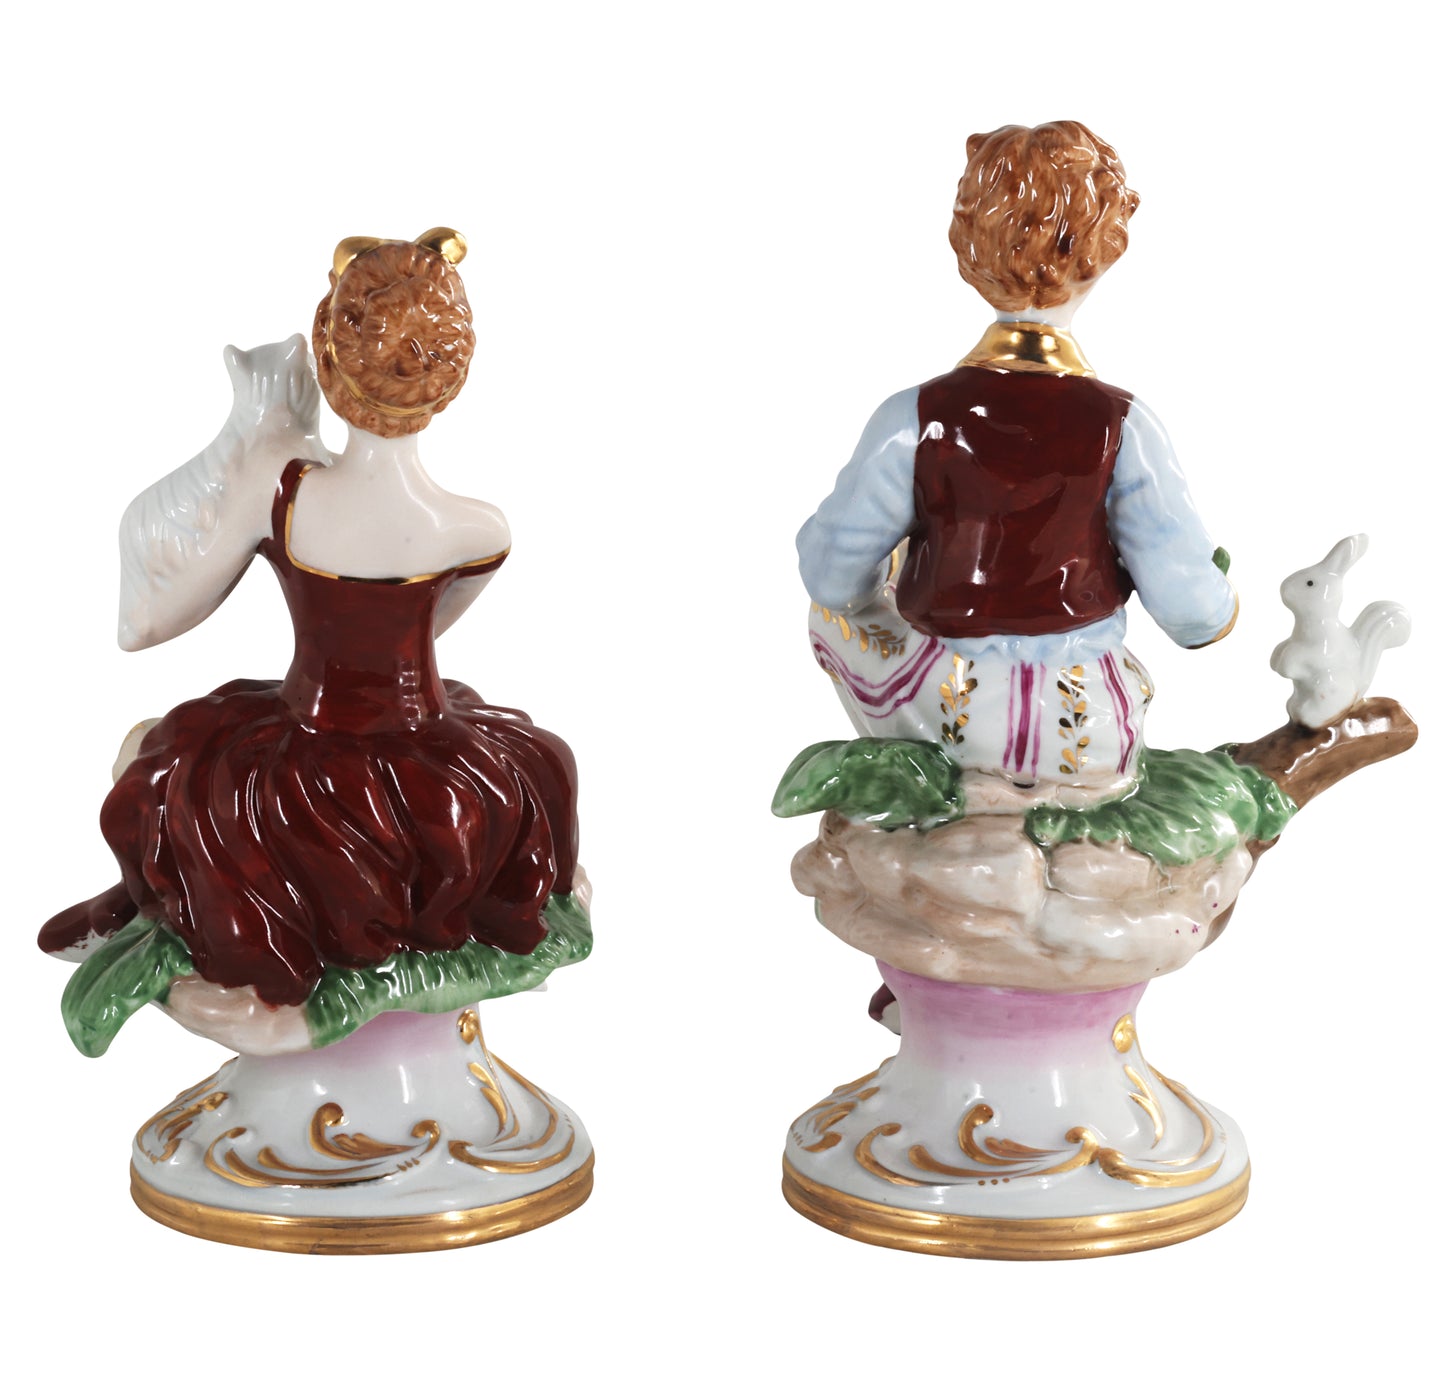 Rococo Style Porcelain Young Girl & Boy Figurine Pair